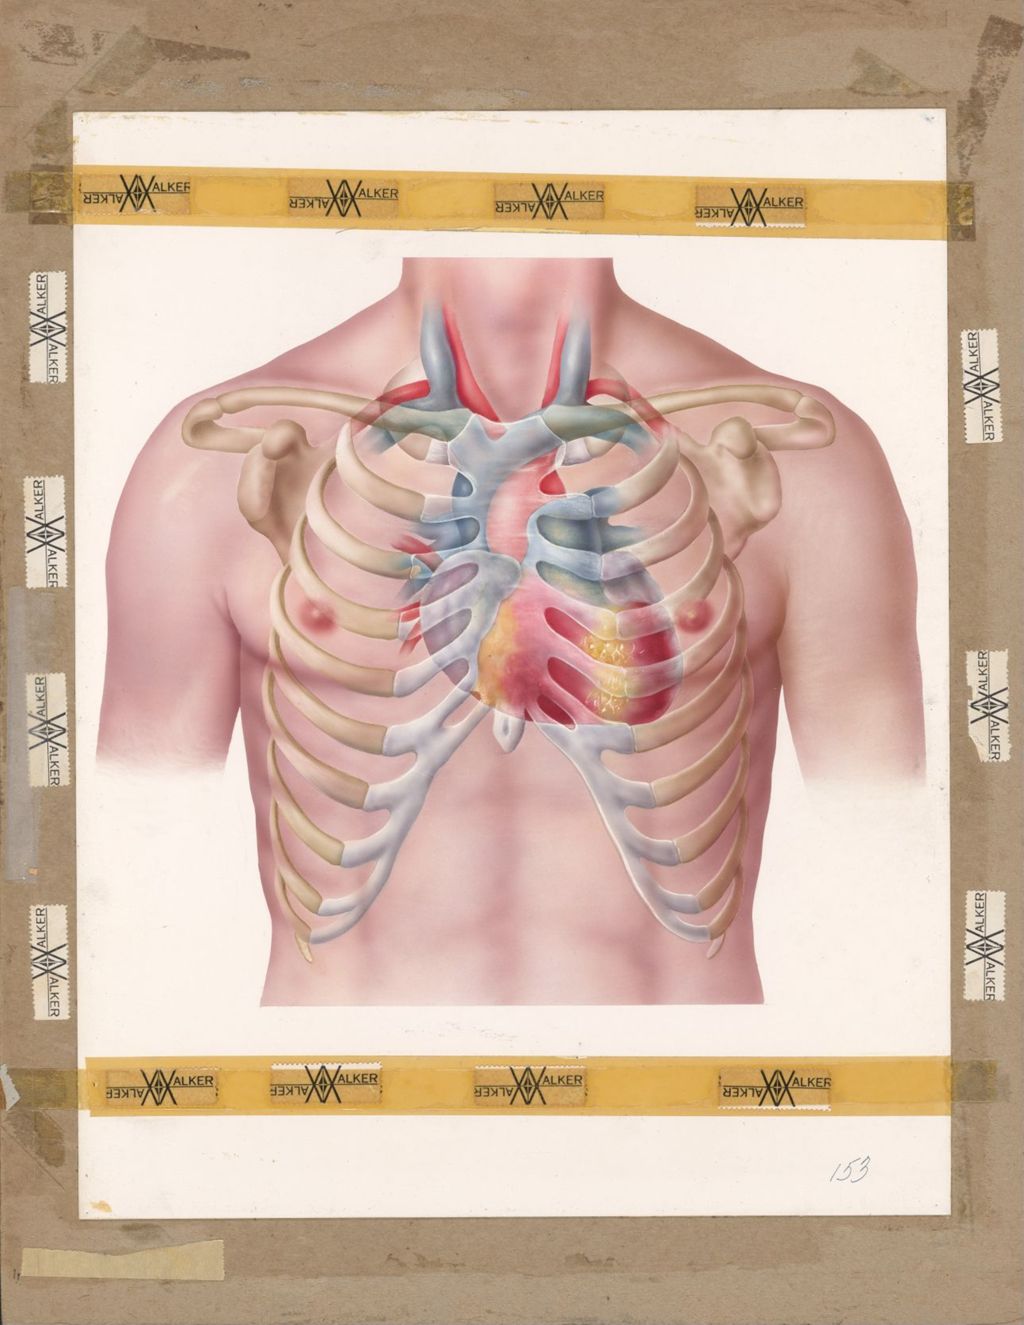 Miniature of Upper torso with ribcage and clavicles, carotid arteries and heart